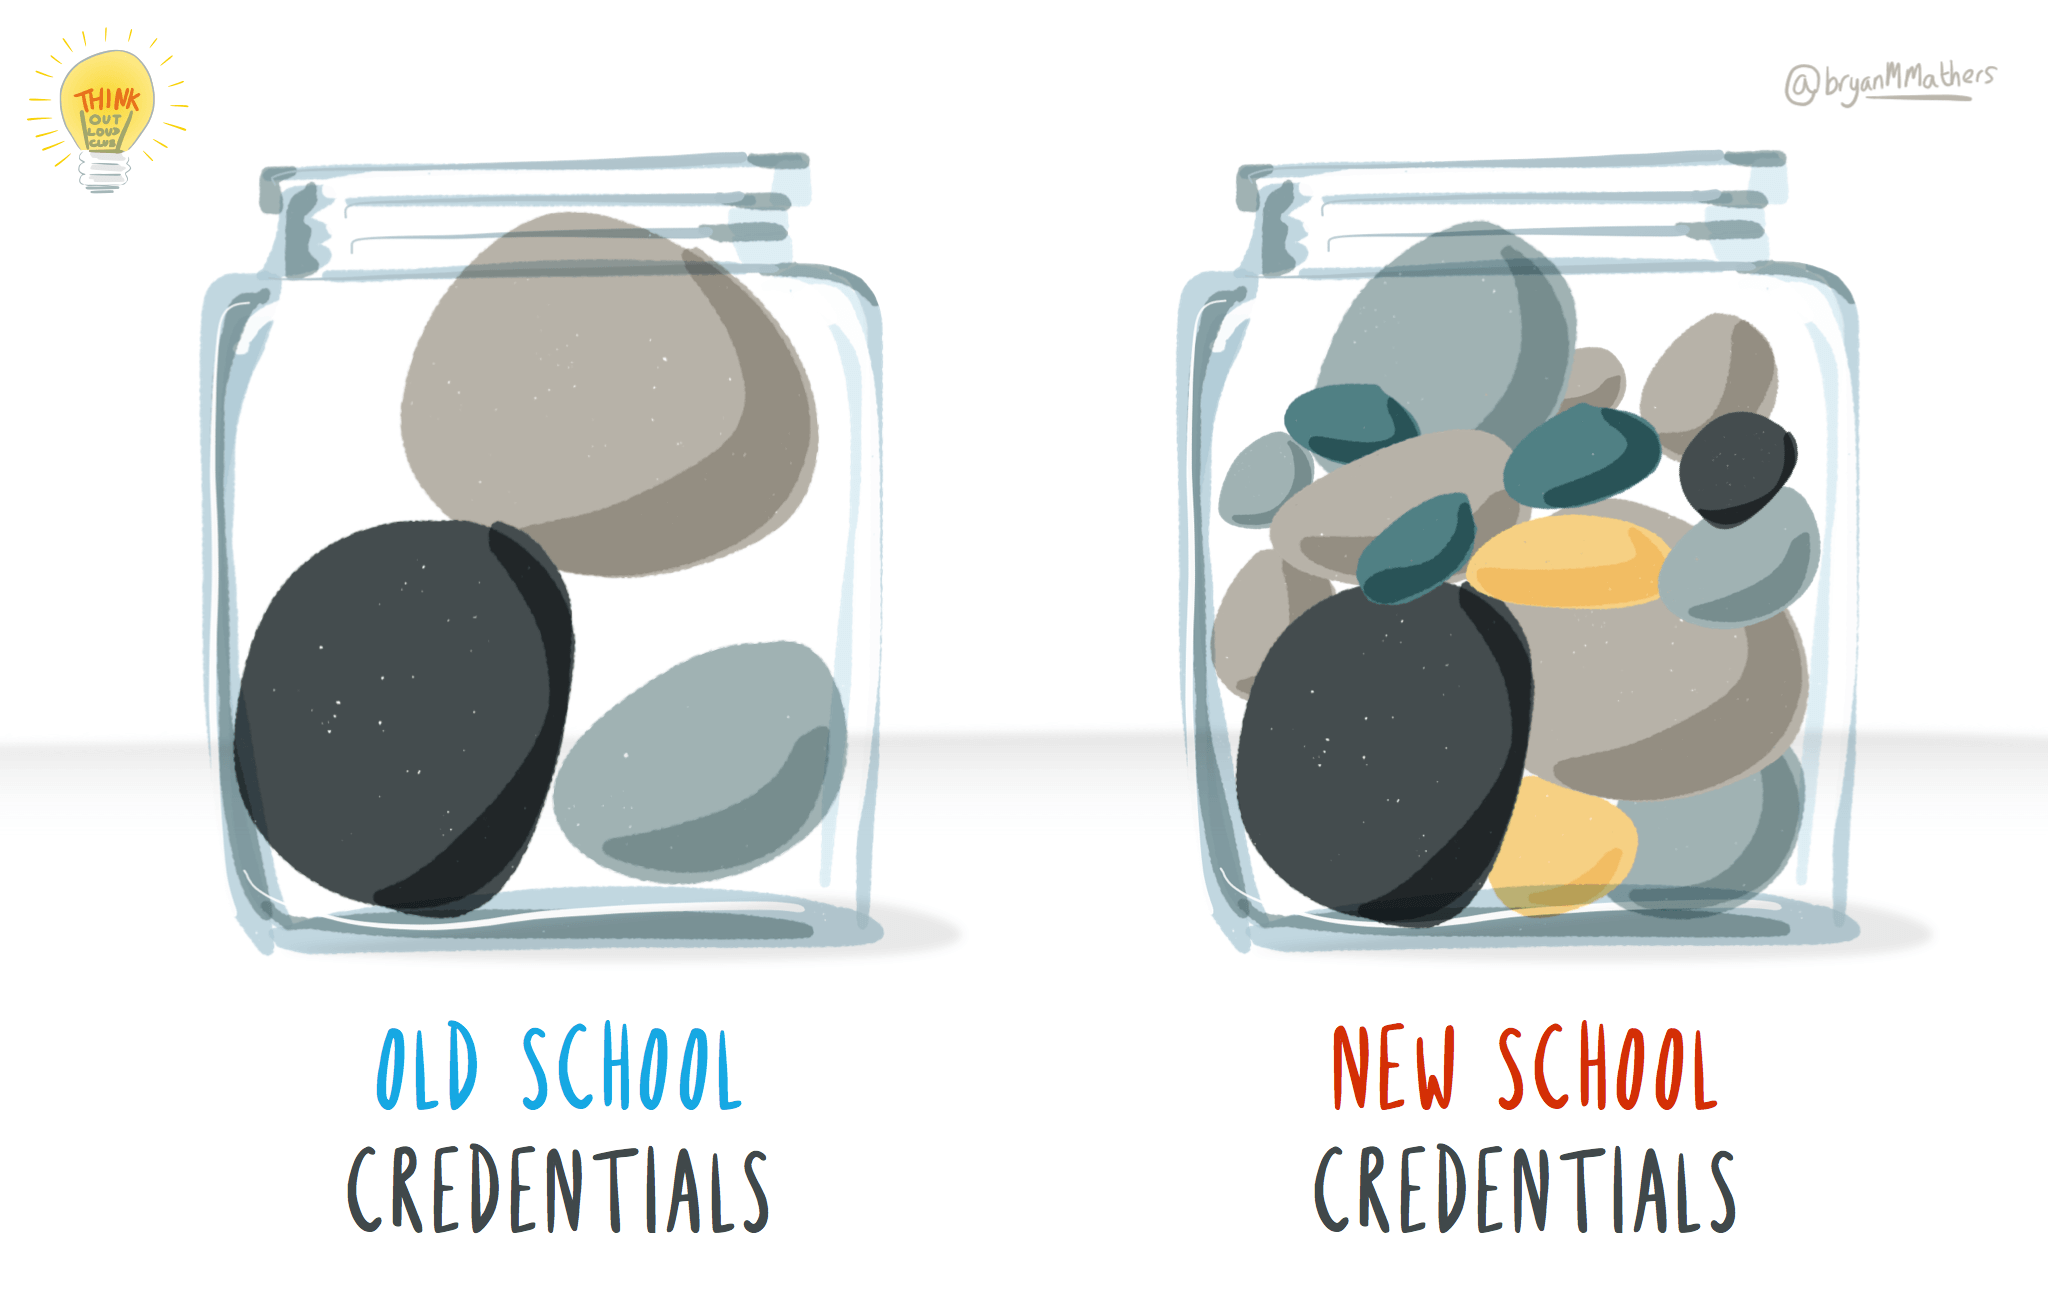 A graphic containing 2 equally sized jars filled with rocks. The left jar only contains 3 large rocks taking up a majority of the space. This represents "old school" credentialing like certificates and college degrees. The jar on the right contains the same 3 large rocks with smaller rocks filling the remaining space. This jar appears more full. The smaller rocks represent other skills that potentially fill in the gaps from certificates and degree programs.